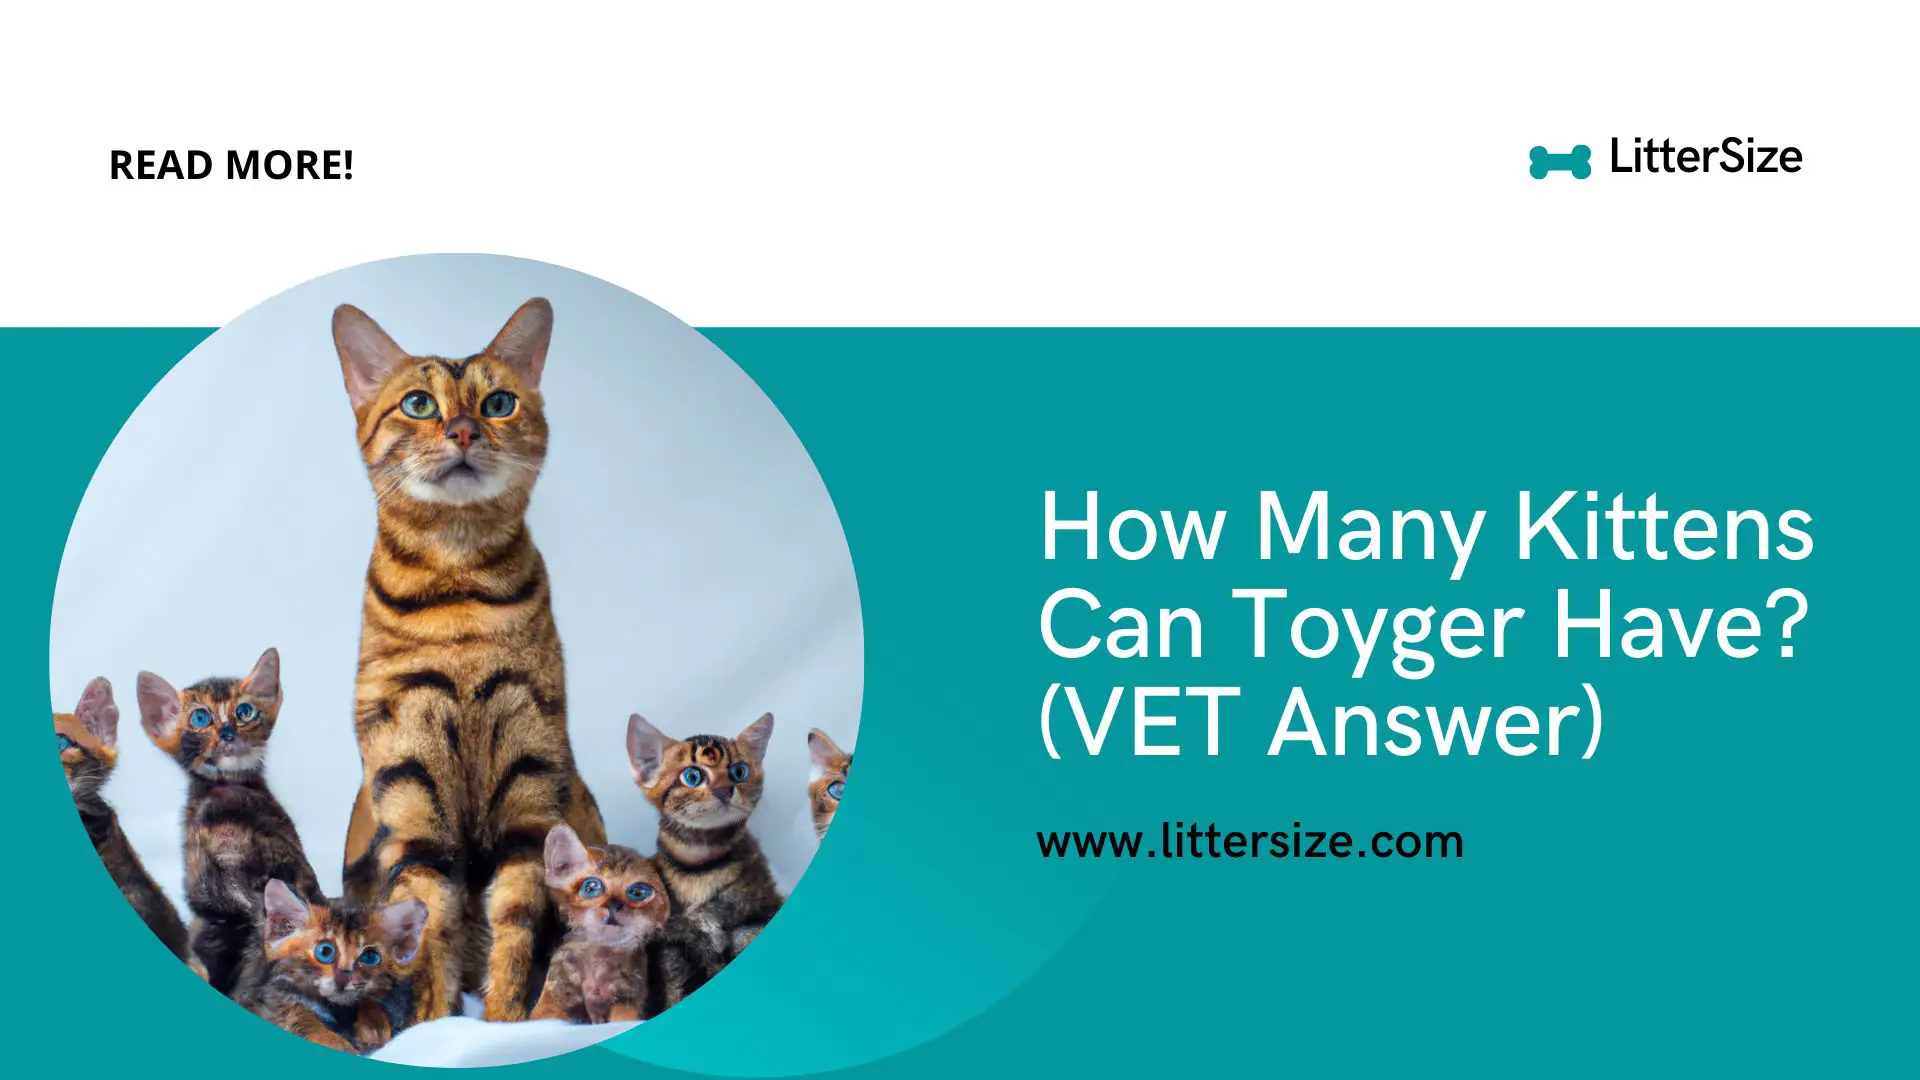 How Many Kittens Can Toyger Have? (VET Answer)